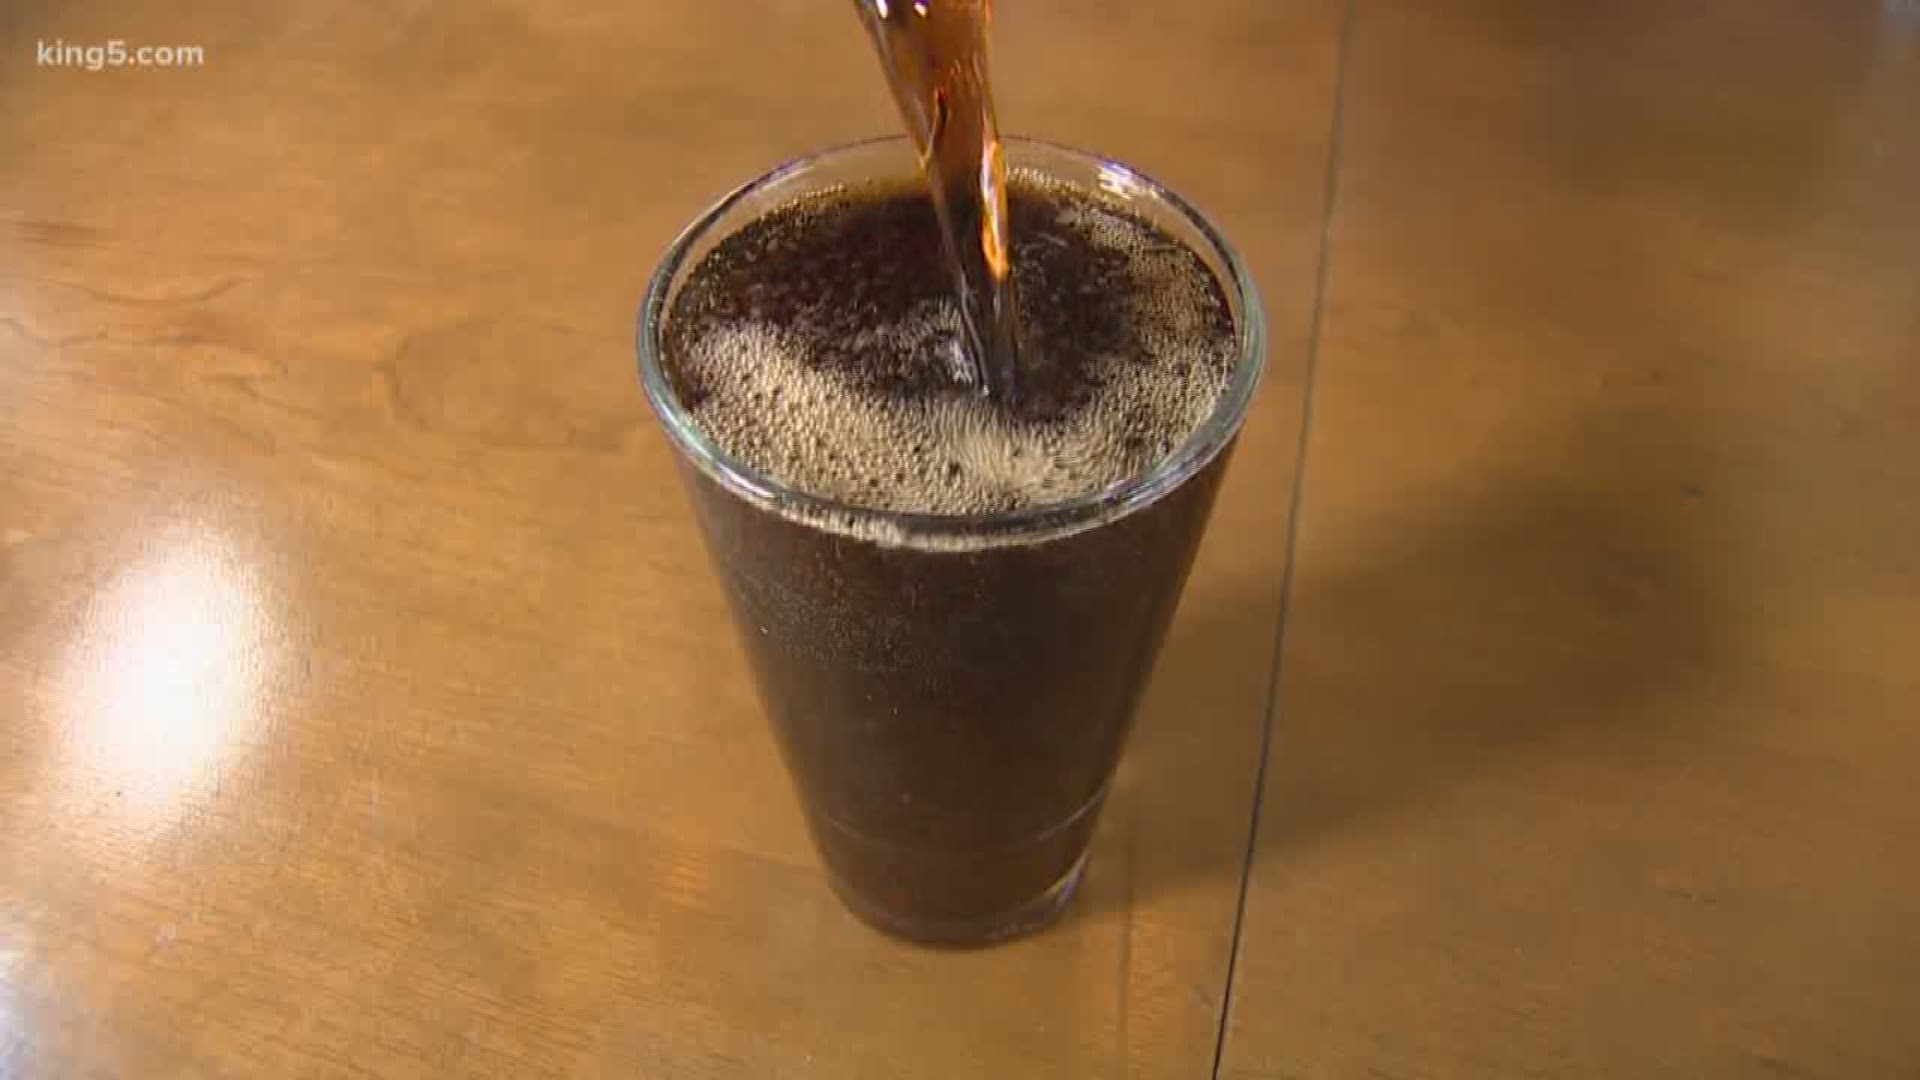 Lawmakers want Washington to be the first state to establish a sweetened beverage tax.